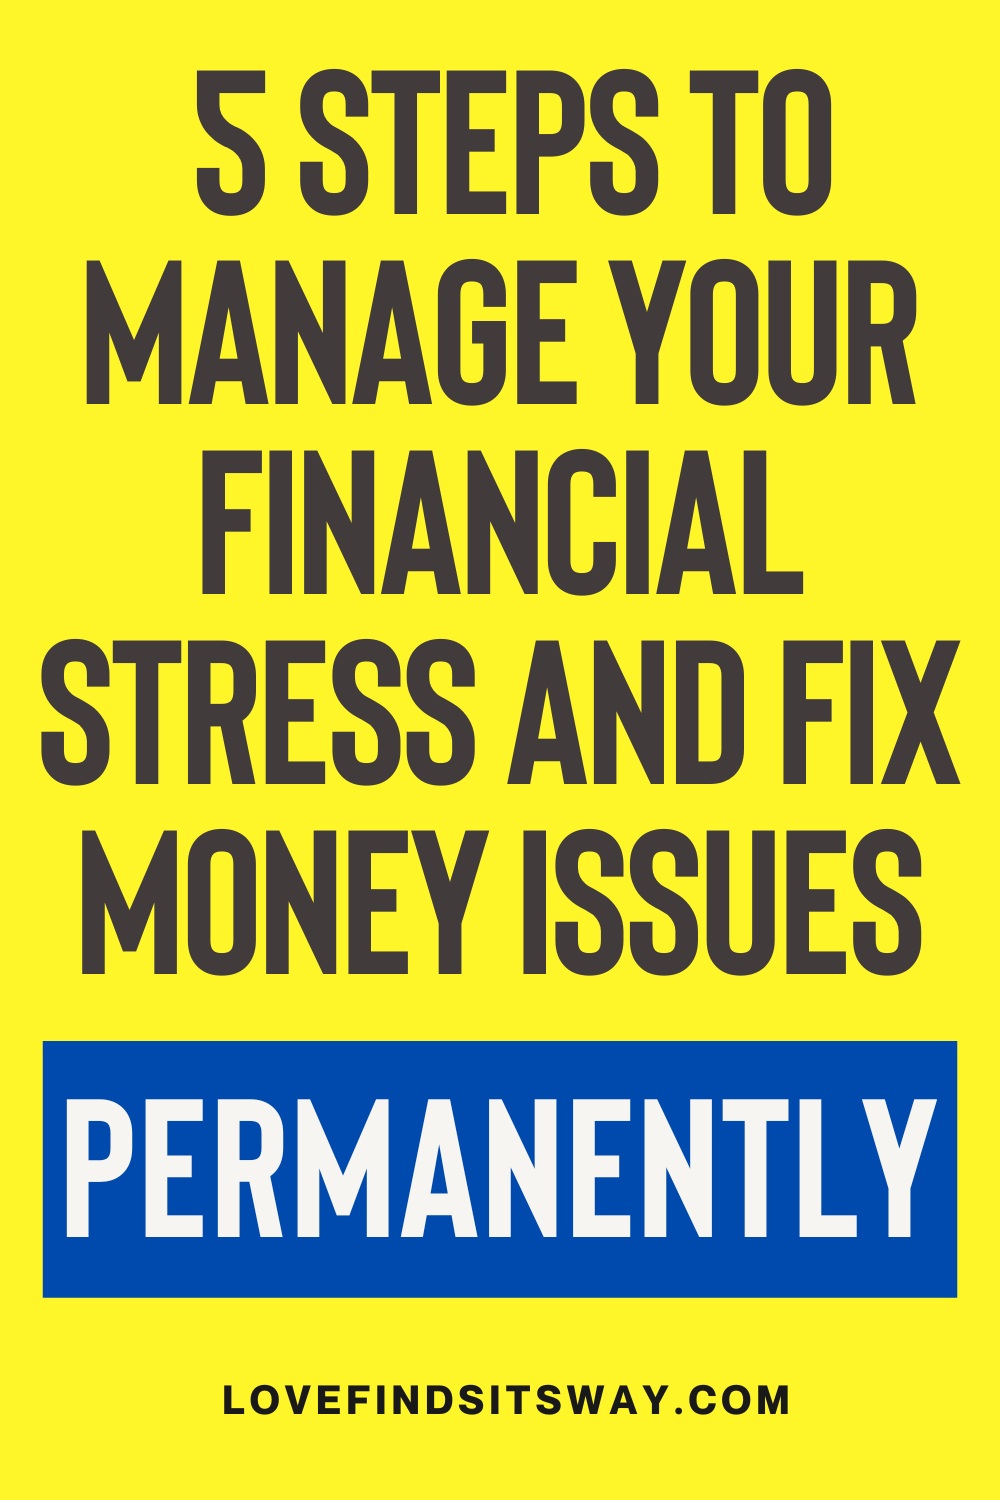 5-Steps-To-Manage-Financial-Stress-And-Fix-Money-Issues-Permanently